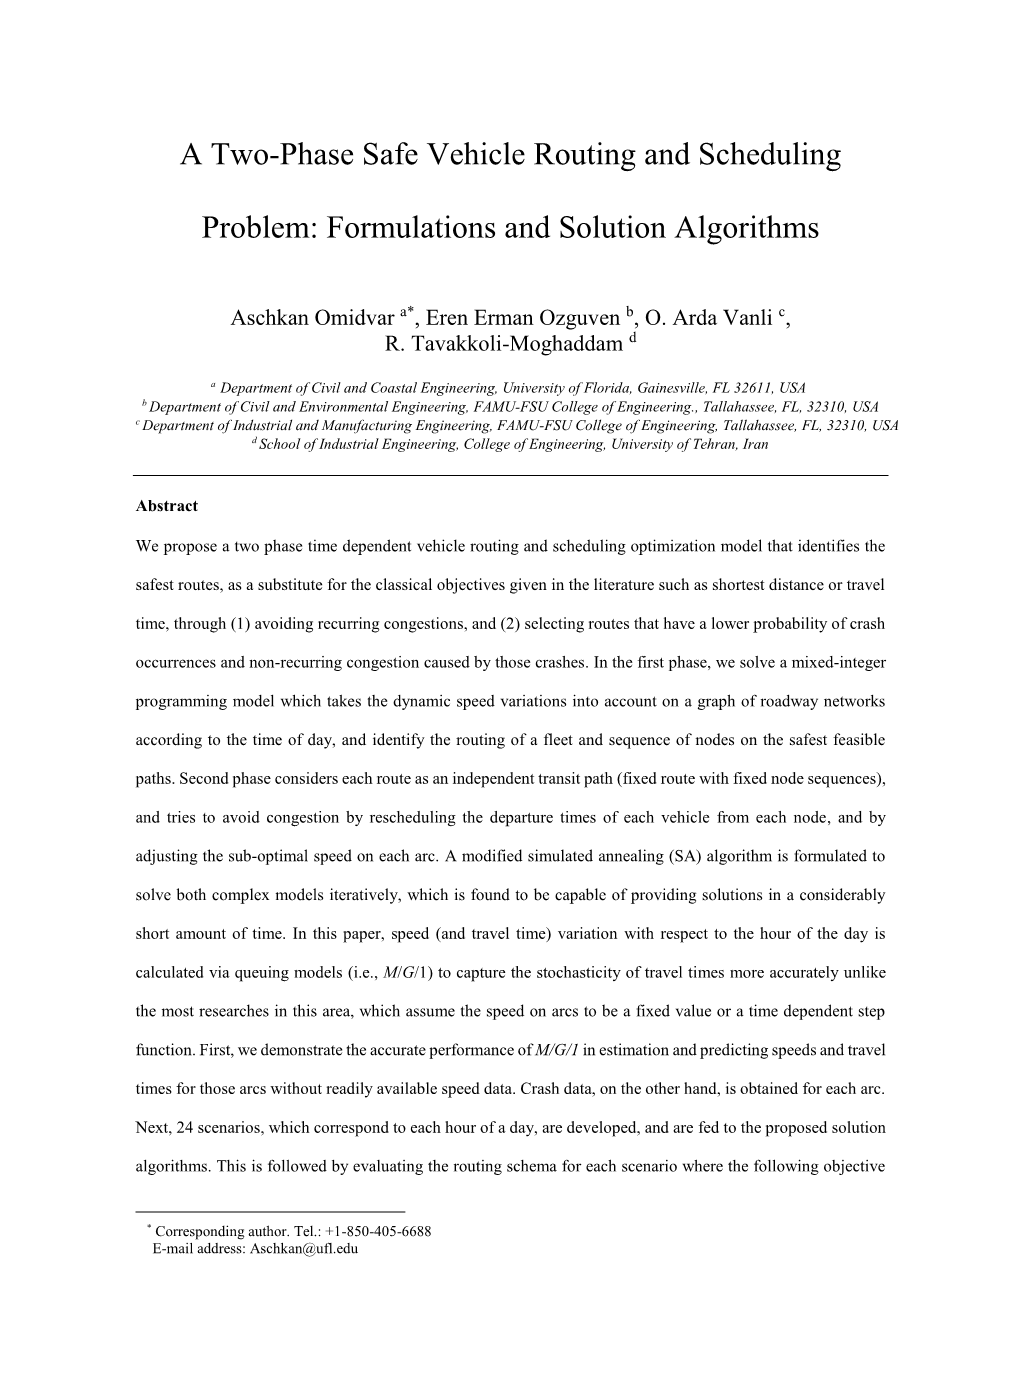 A Two-Phase Safe Vehicle Routing and Scheduling Problem